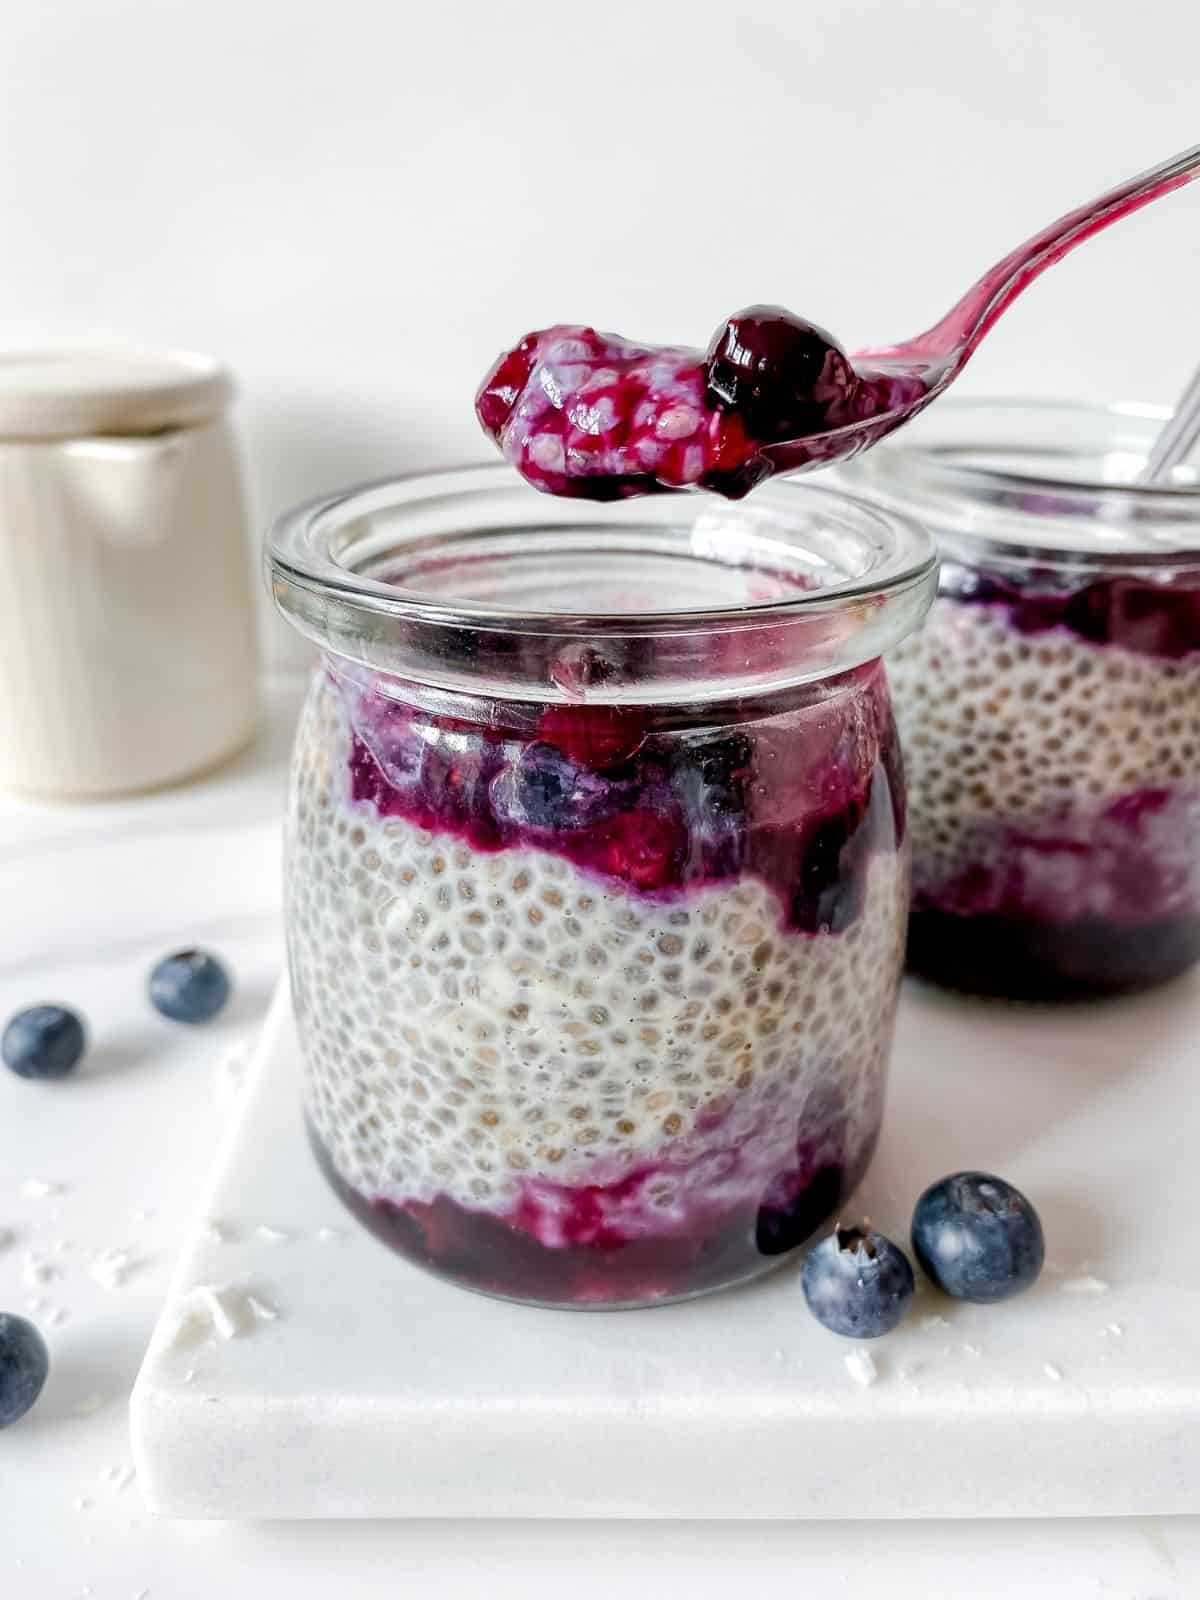 cardamom chia pudding with a spoonful raised above it.